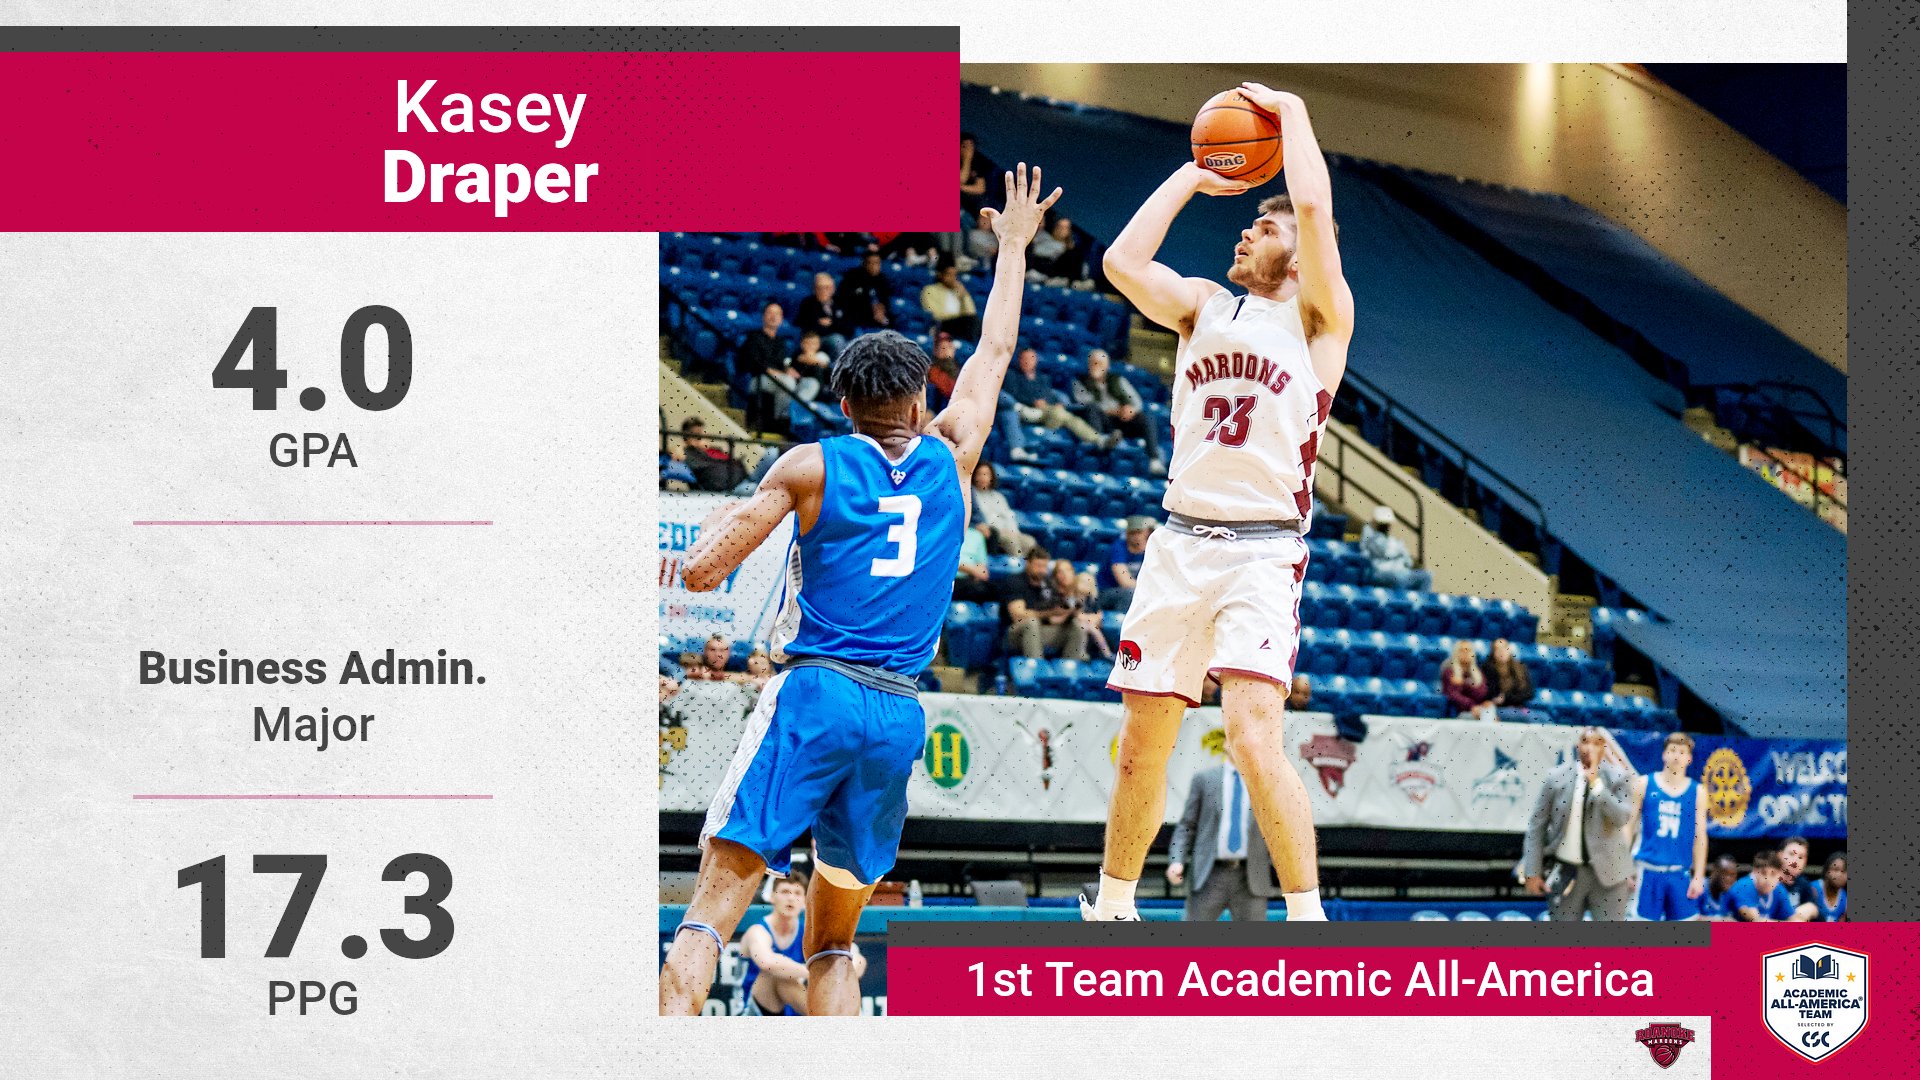 Draper Named First Team Academic All-American by CSC